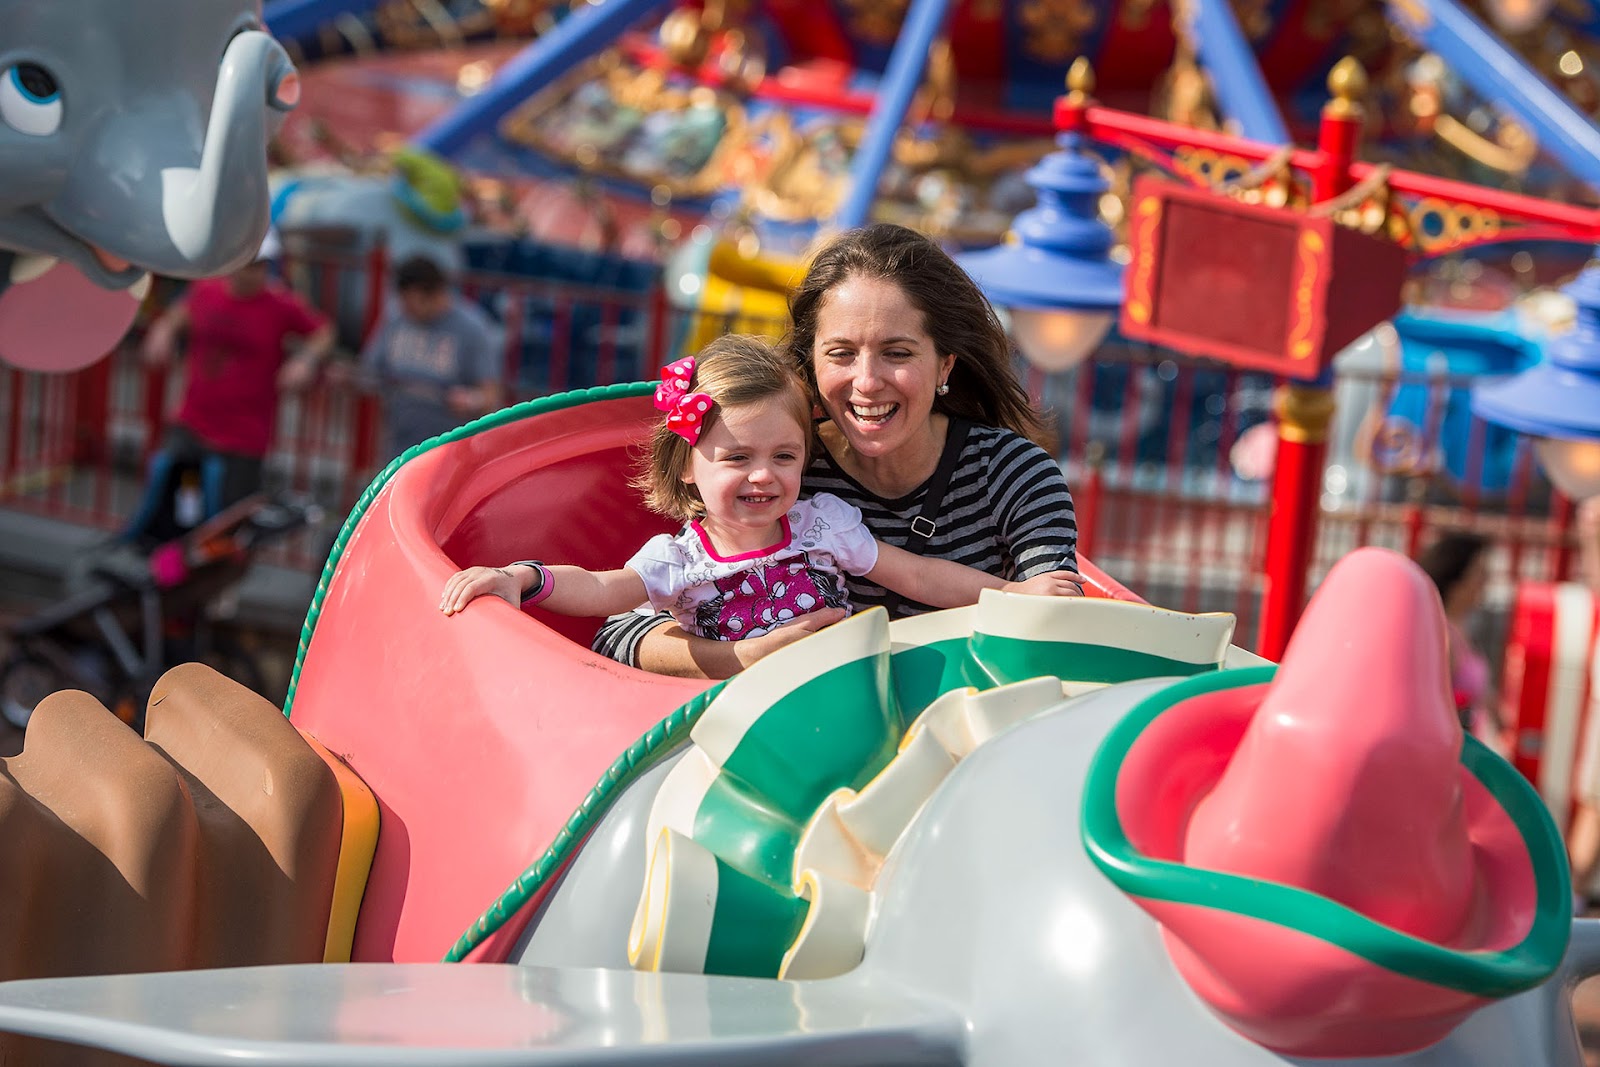 12 Best Amusement Parks for Toddlers and Young Kids 2020 |